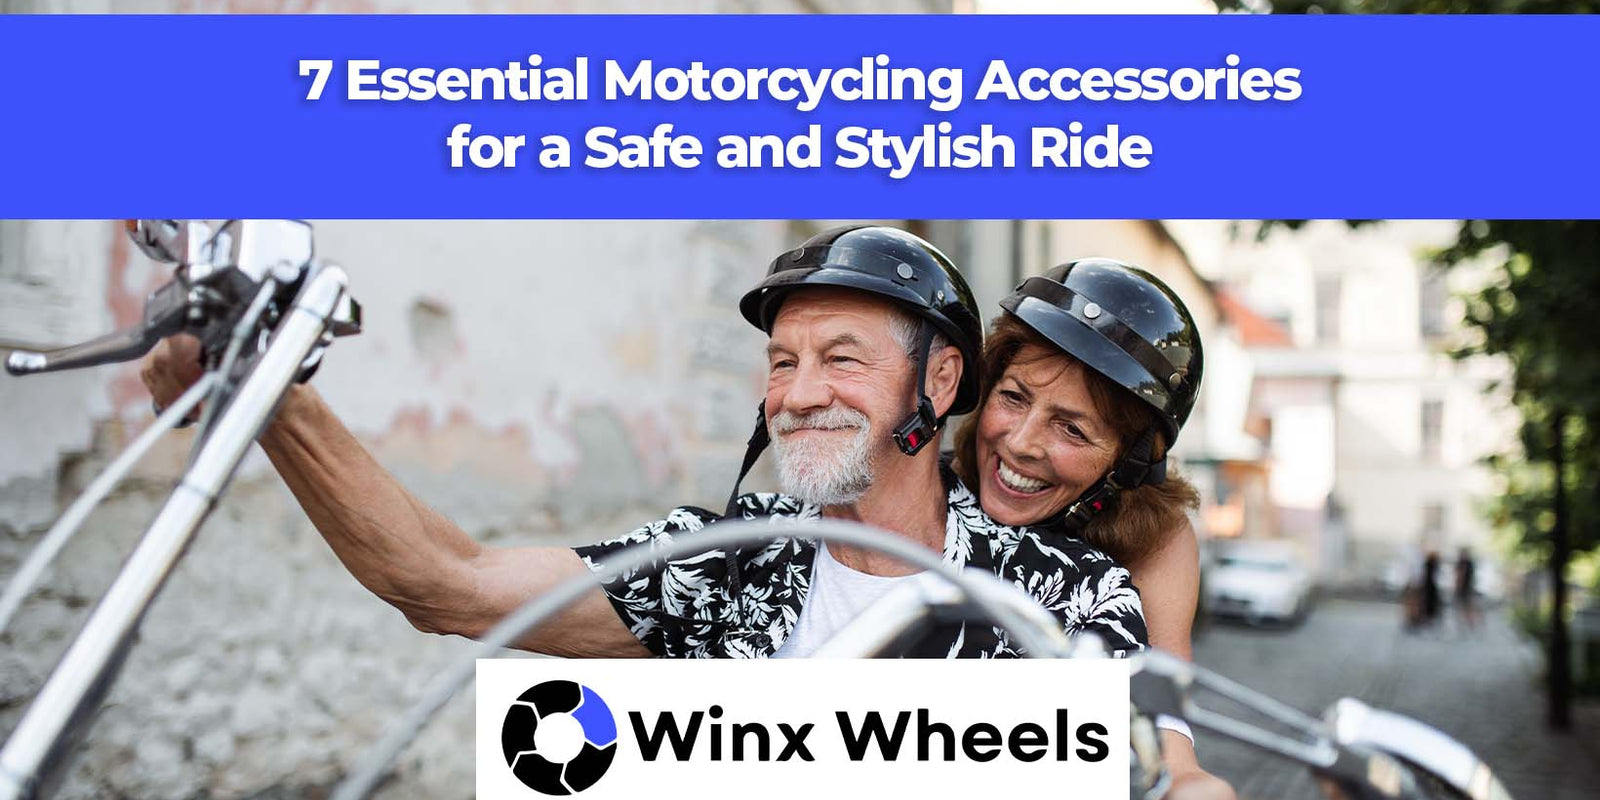 7 Essential Motorcycling Accessories for a Safe and Stylish Ride